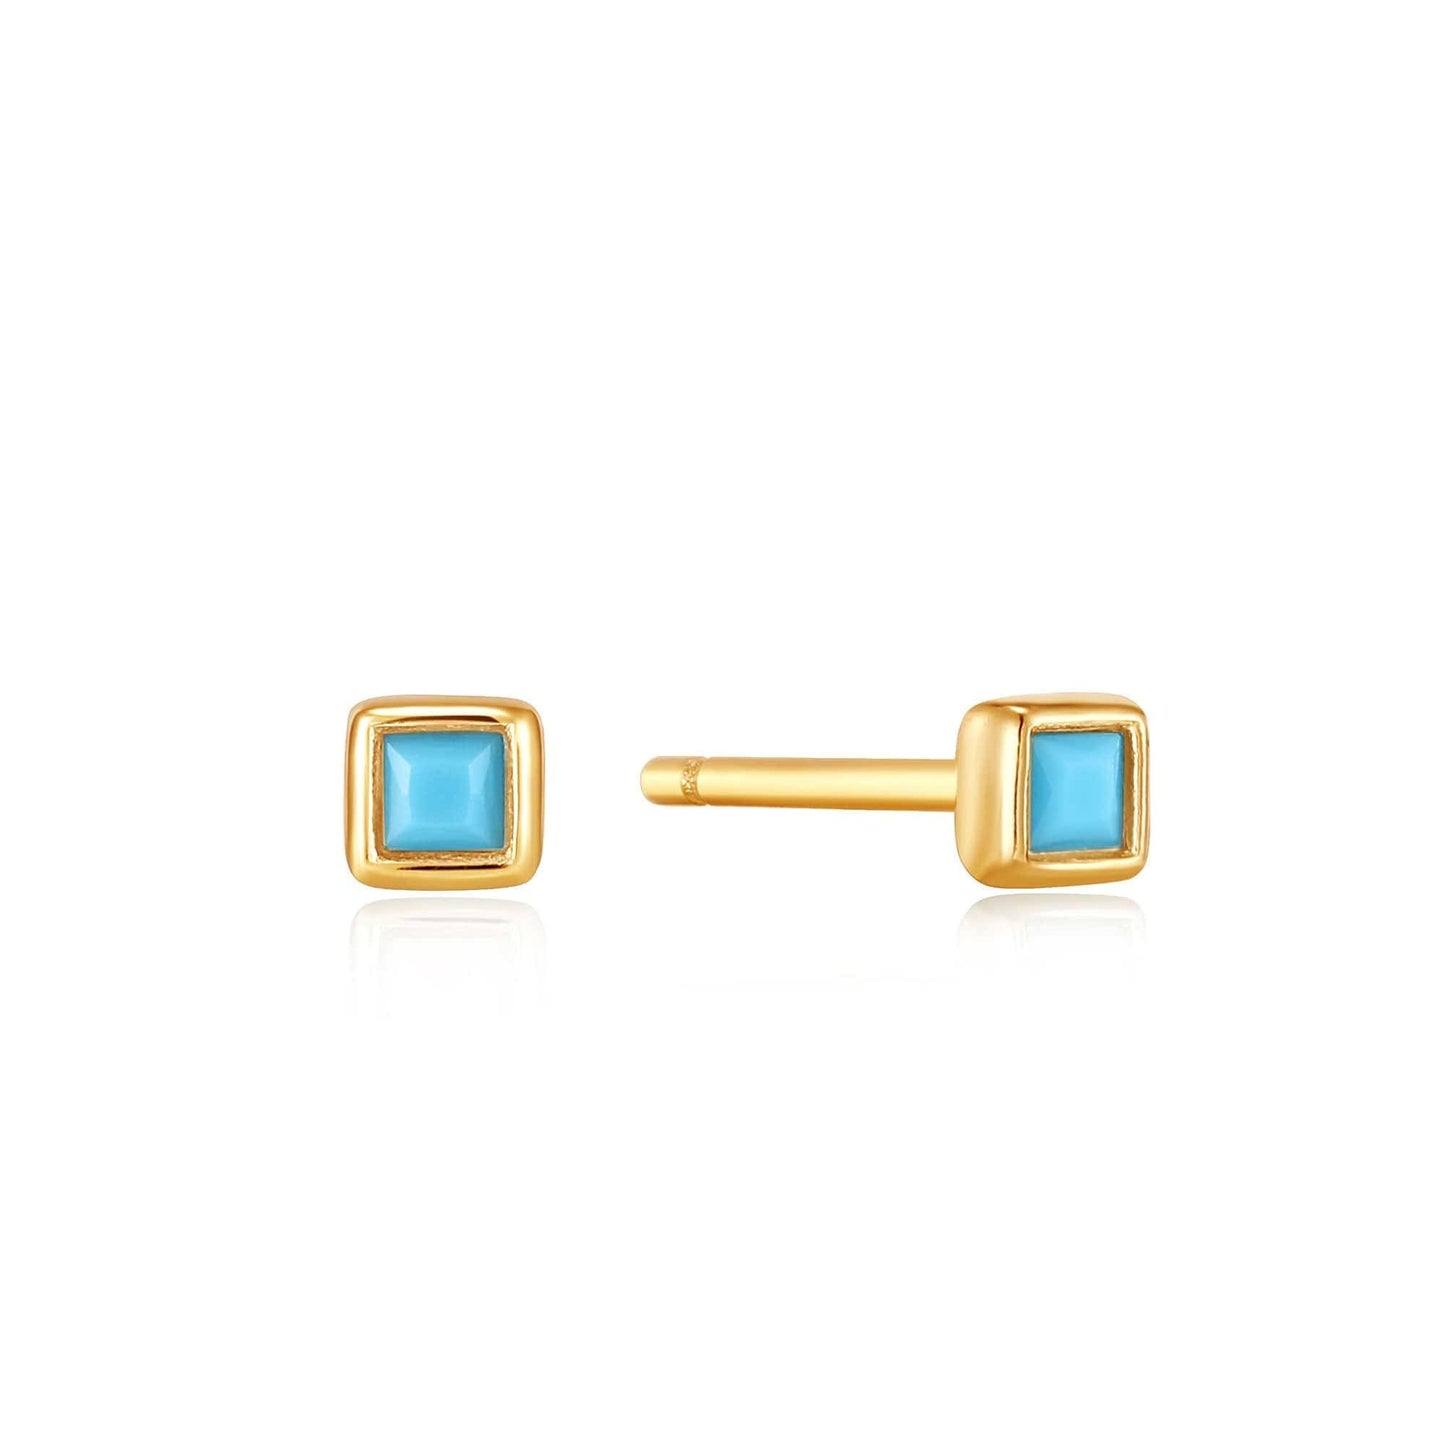 EAR-GPL Turquoise Square Gold Stud Earrings